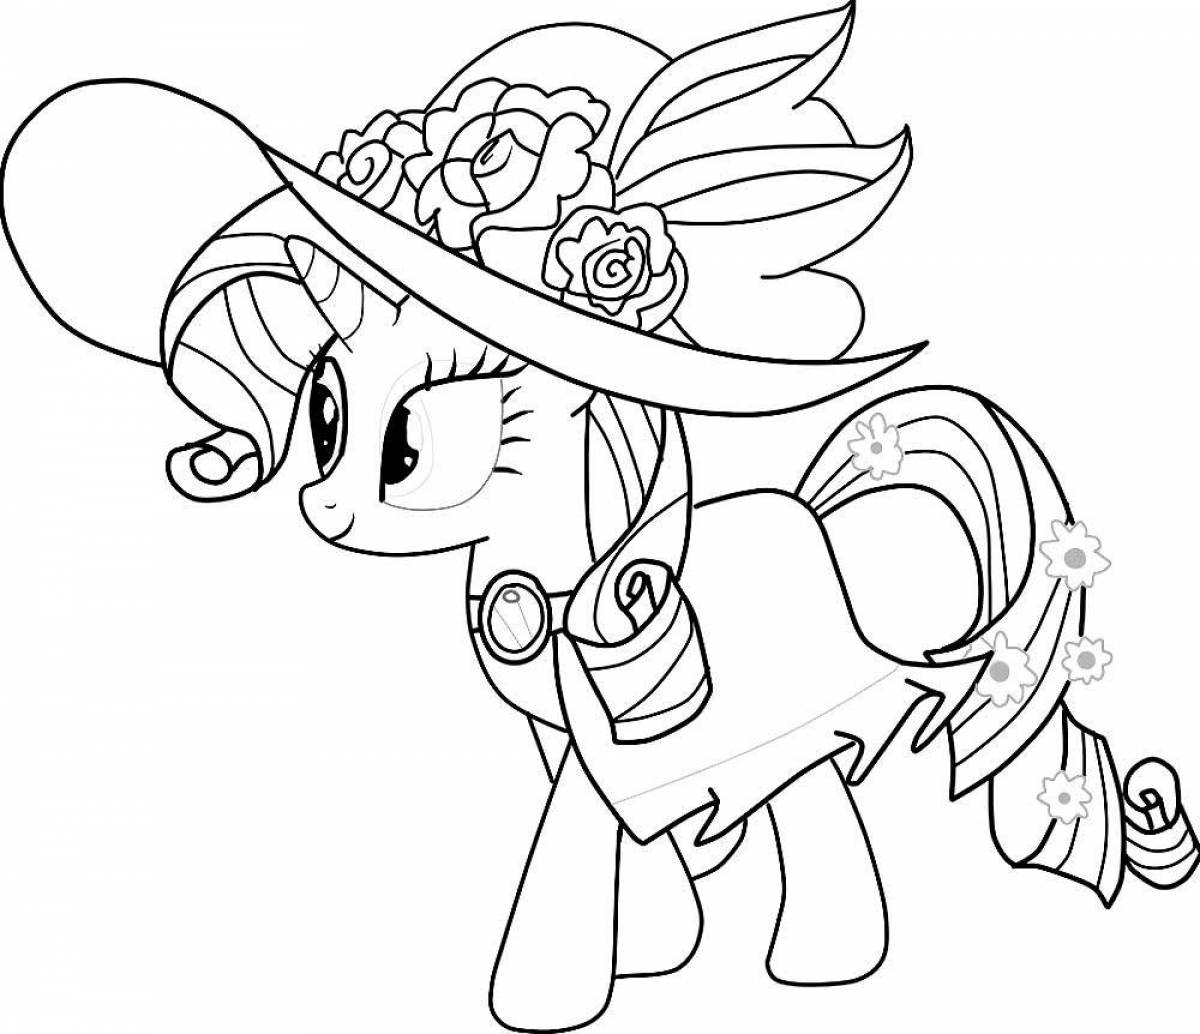 Coloring book brave pony